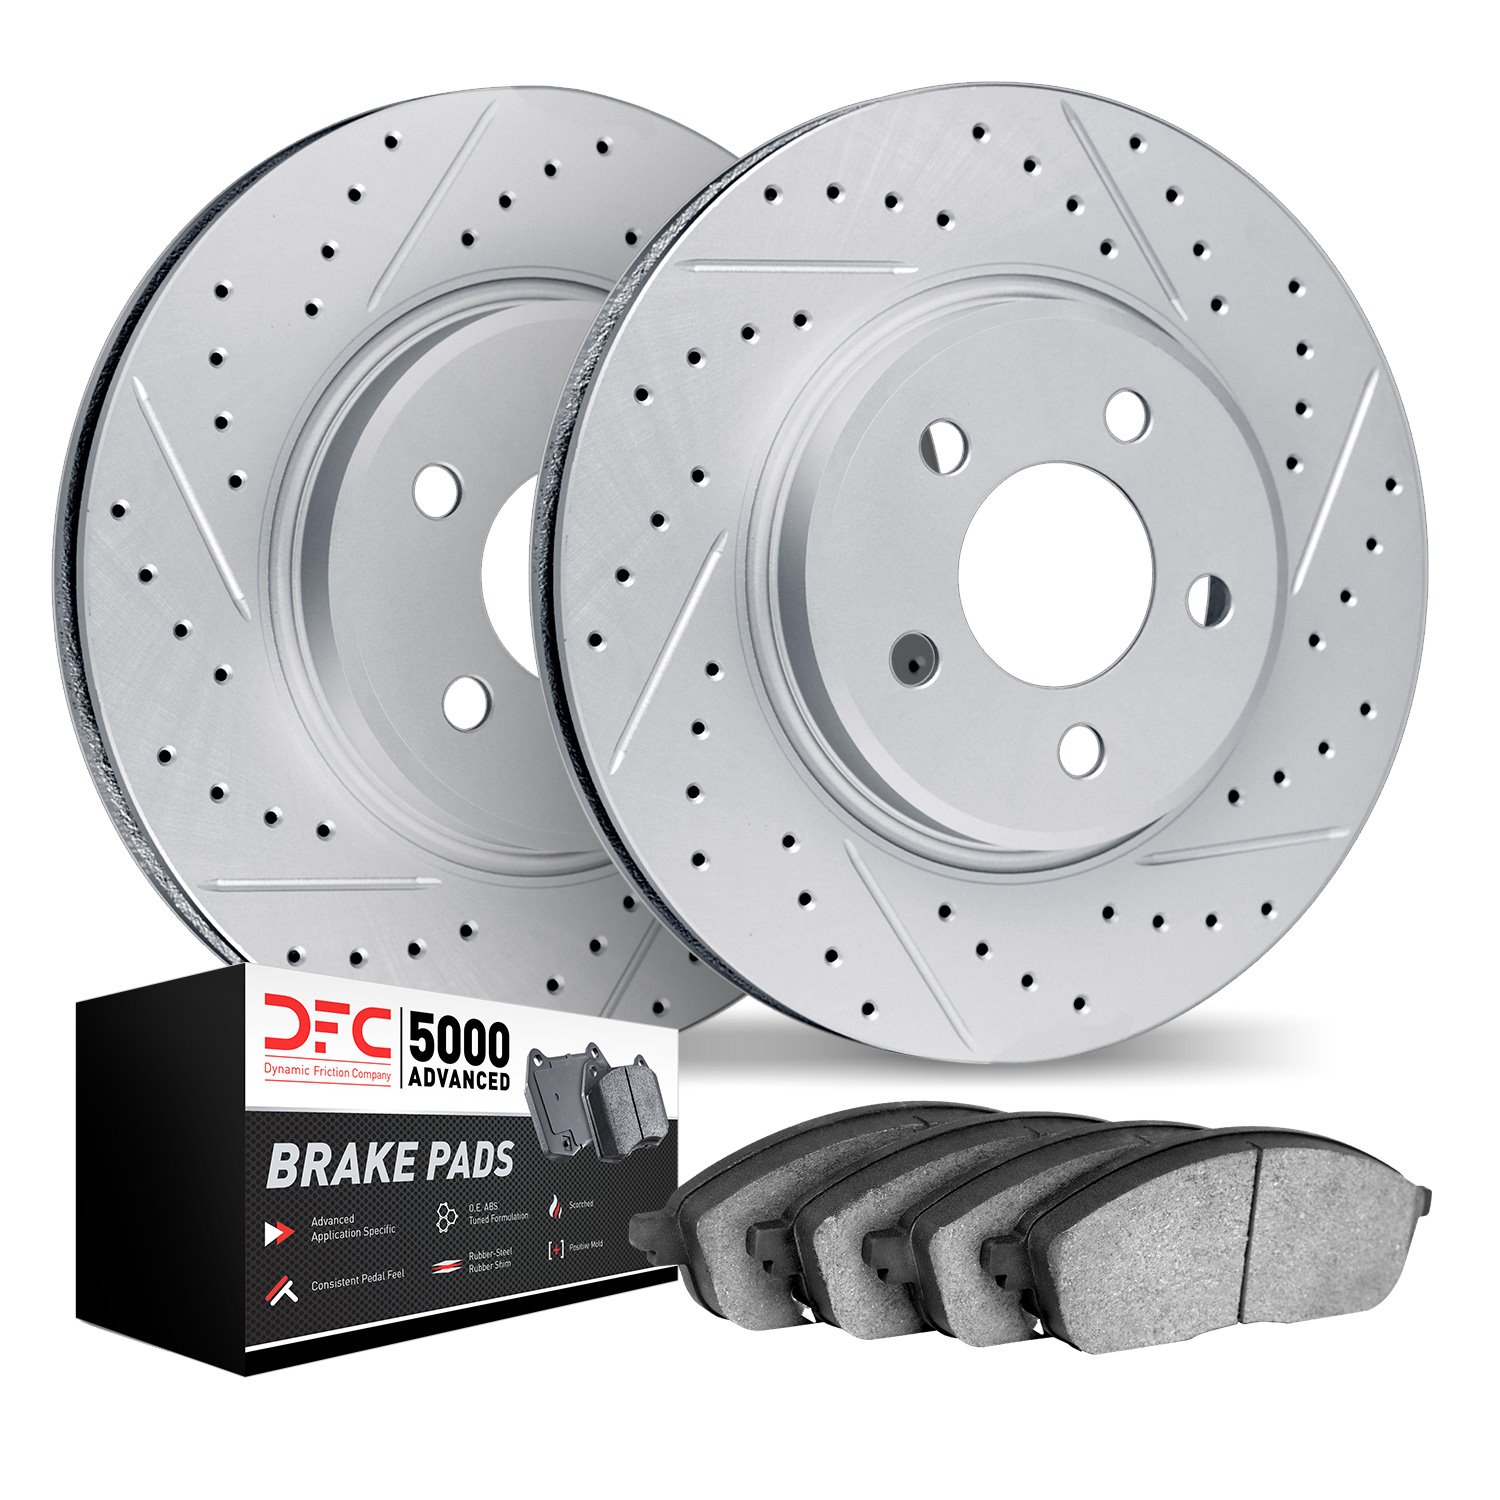 2502-31148 Geoperformance Drilled/Slotted Rotors w/5000 Advanced Brake Pads Kit, 2018-2021 BMW, Position: Front